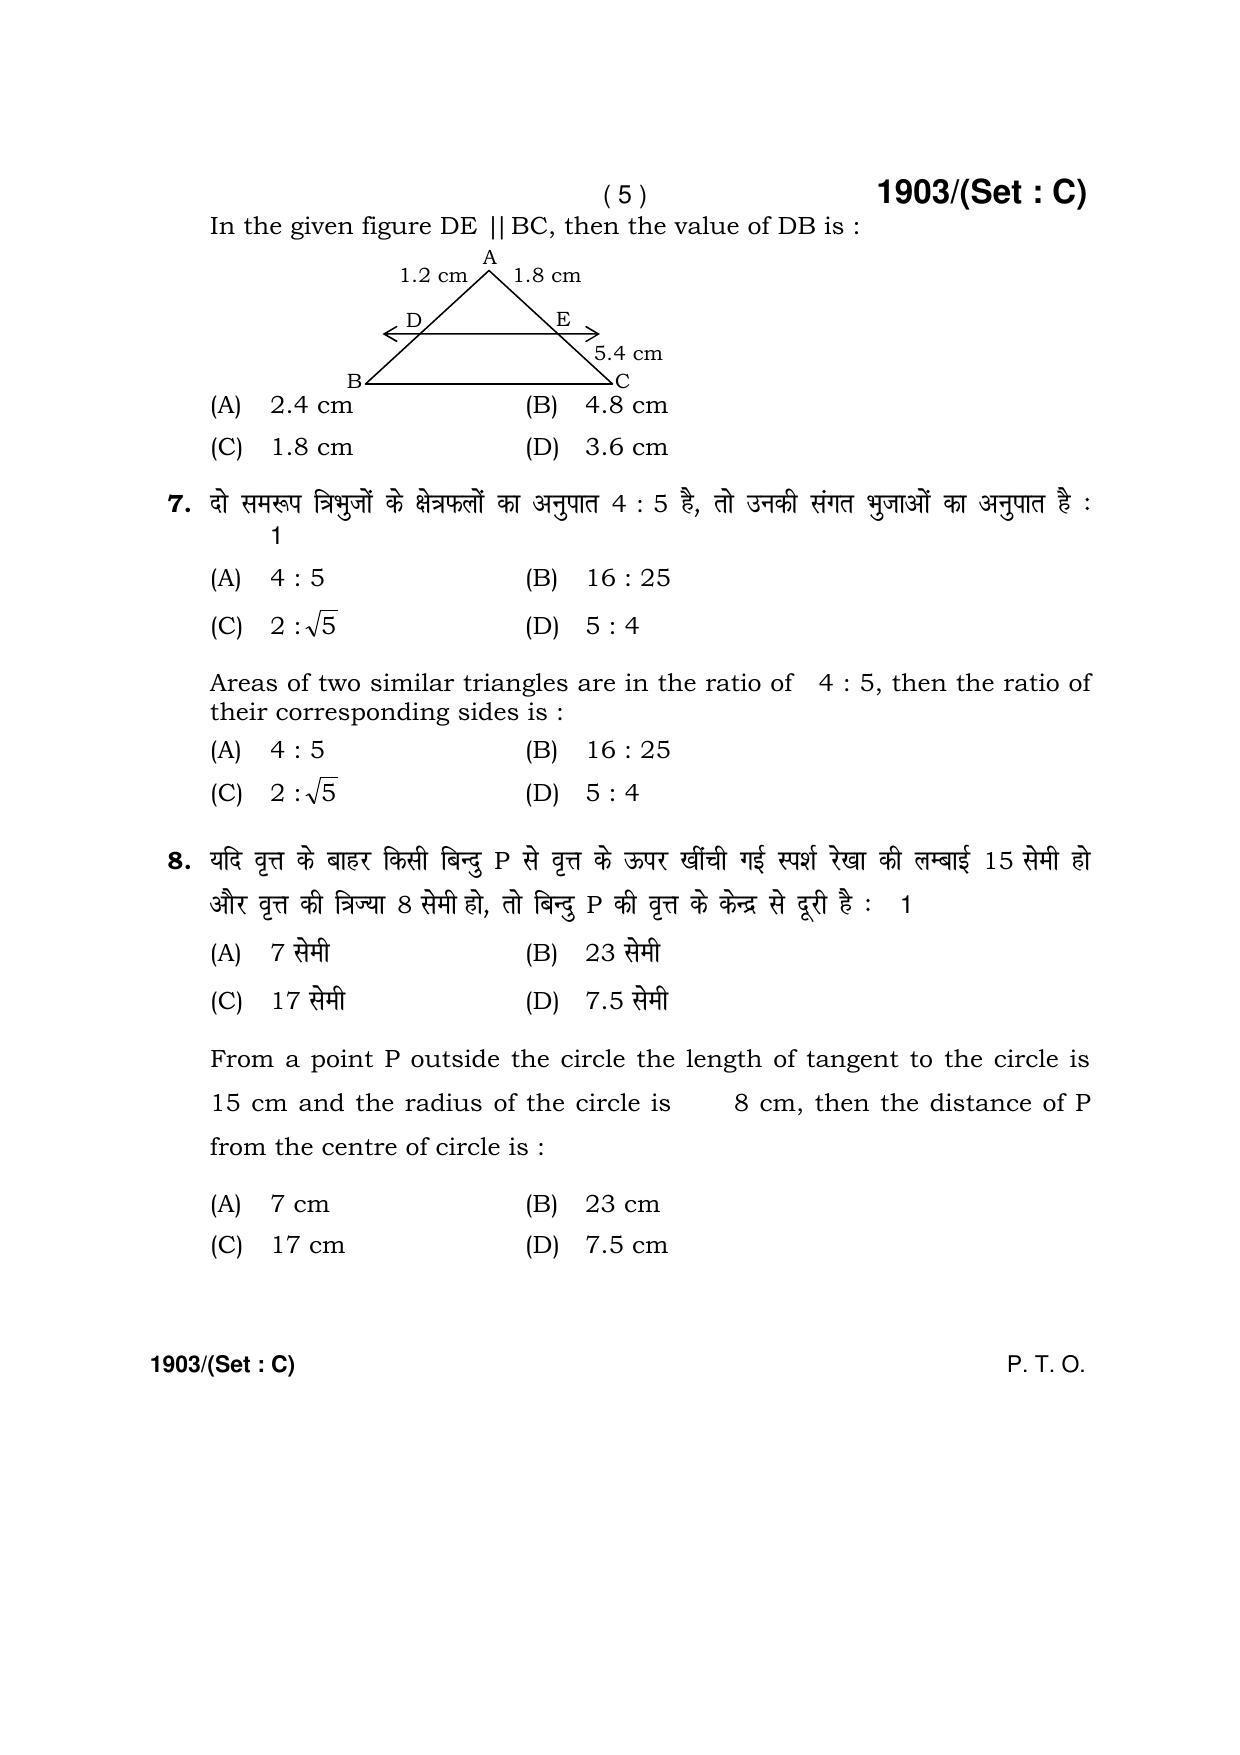 Haryana Board HBSE Class 10 Mathematics -C 2017 Question Paper - Page 5